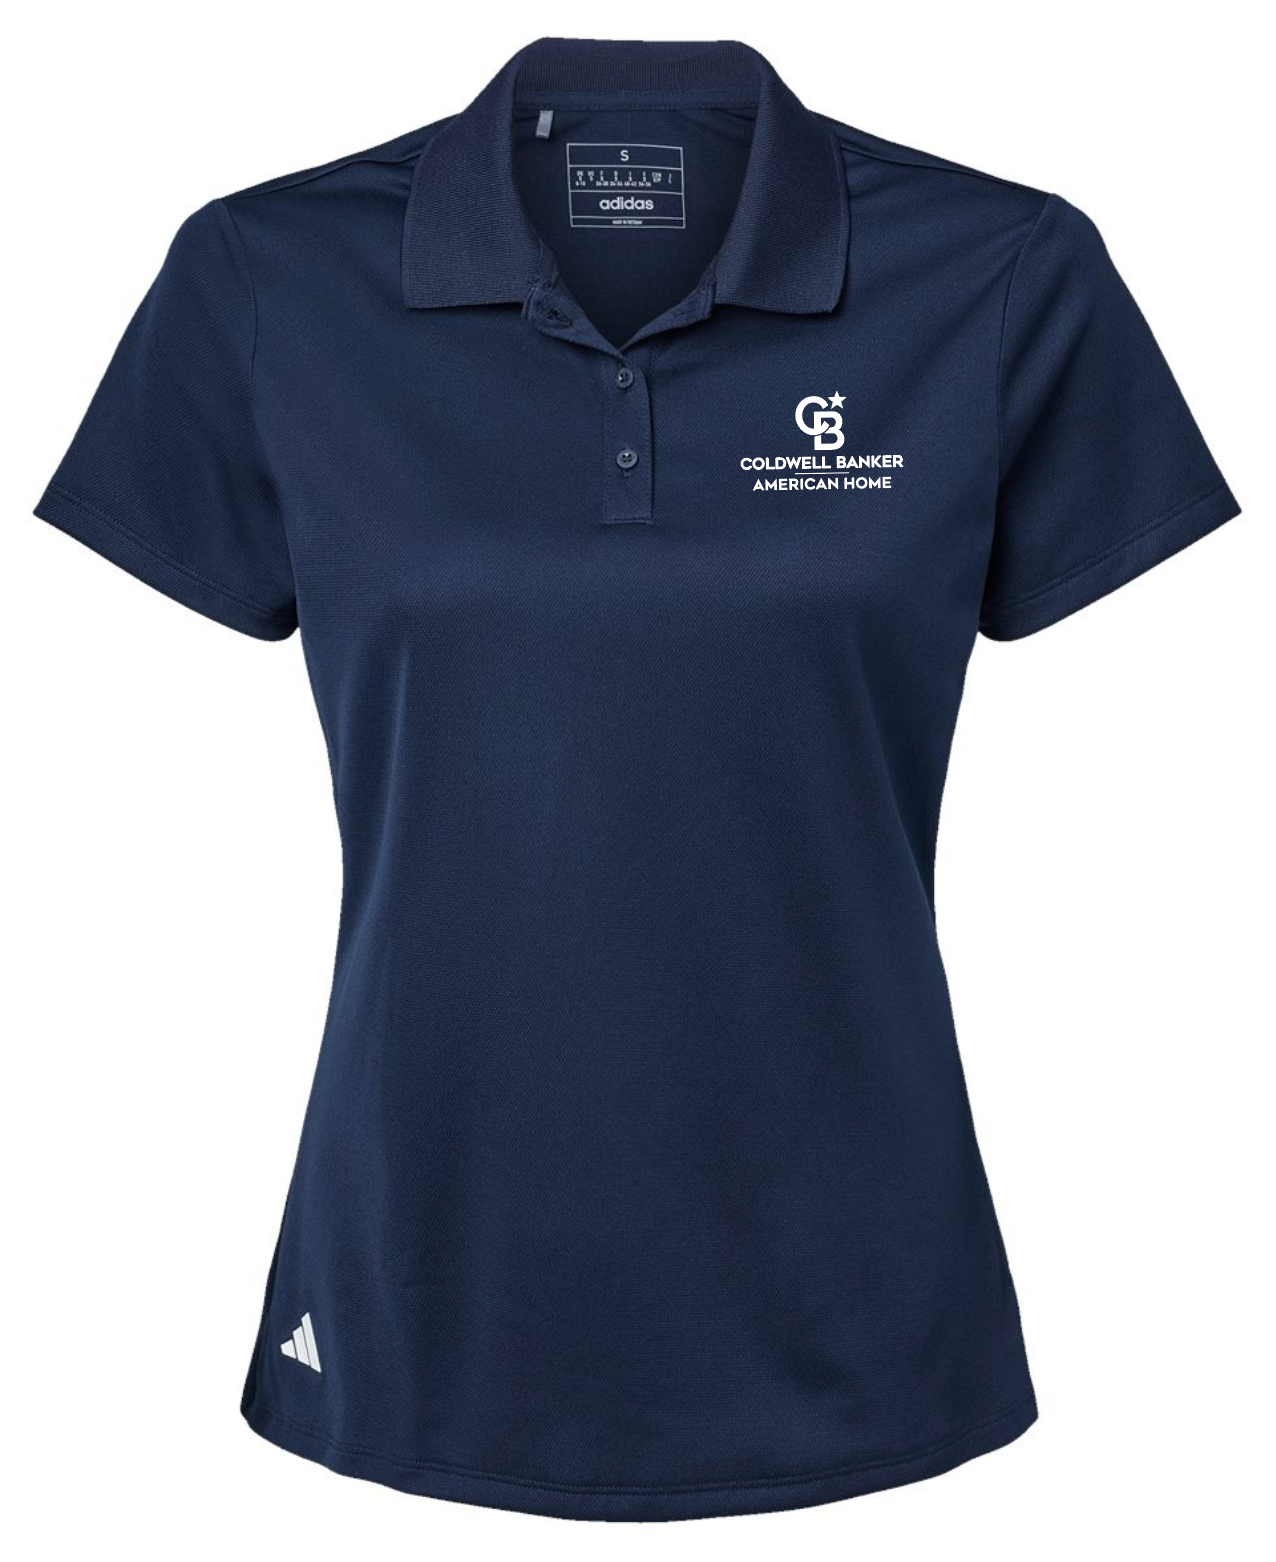 Coldwell Banker Adidas Womens Sport Polo